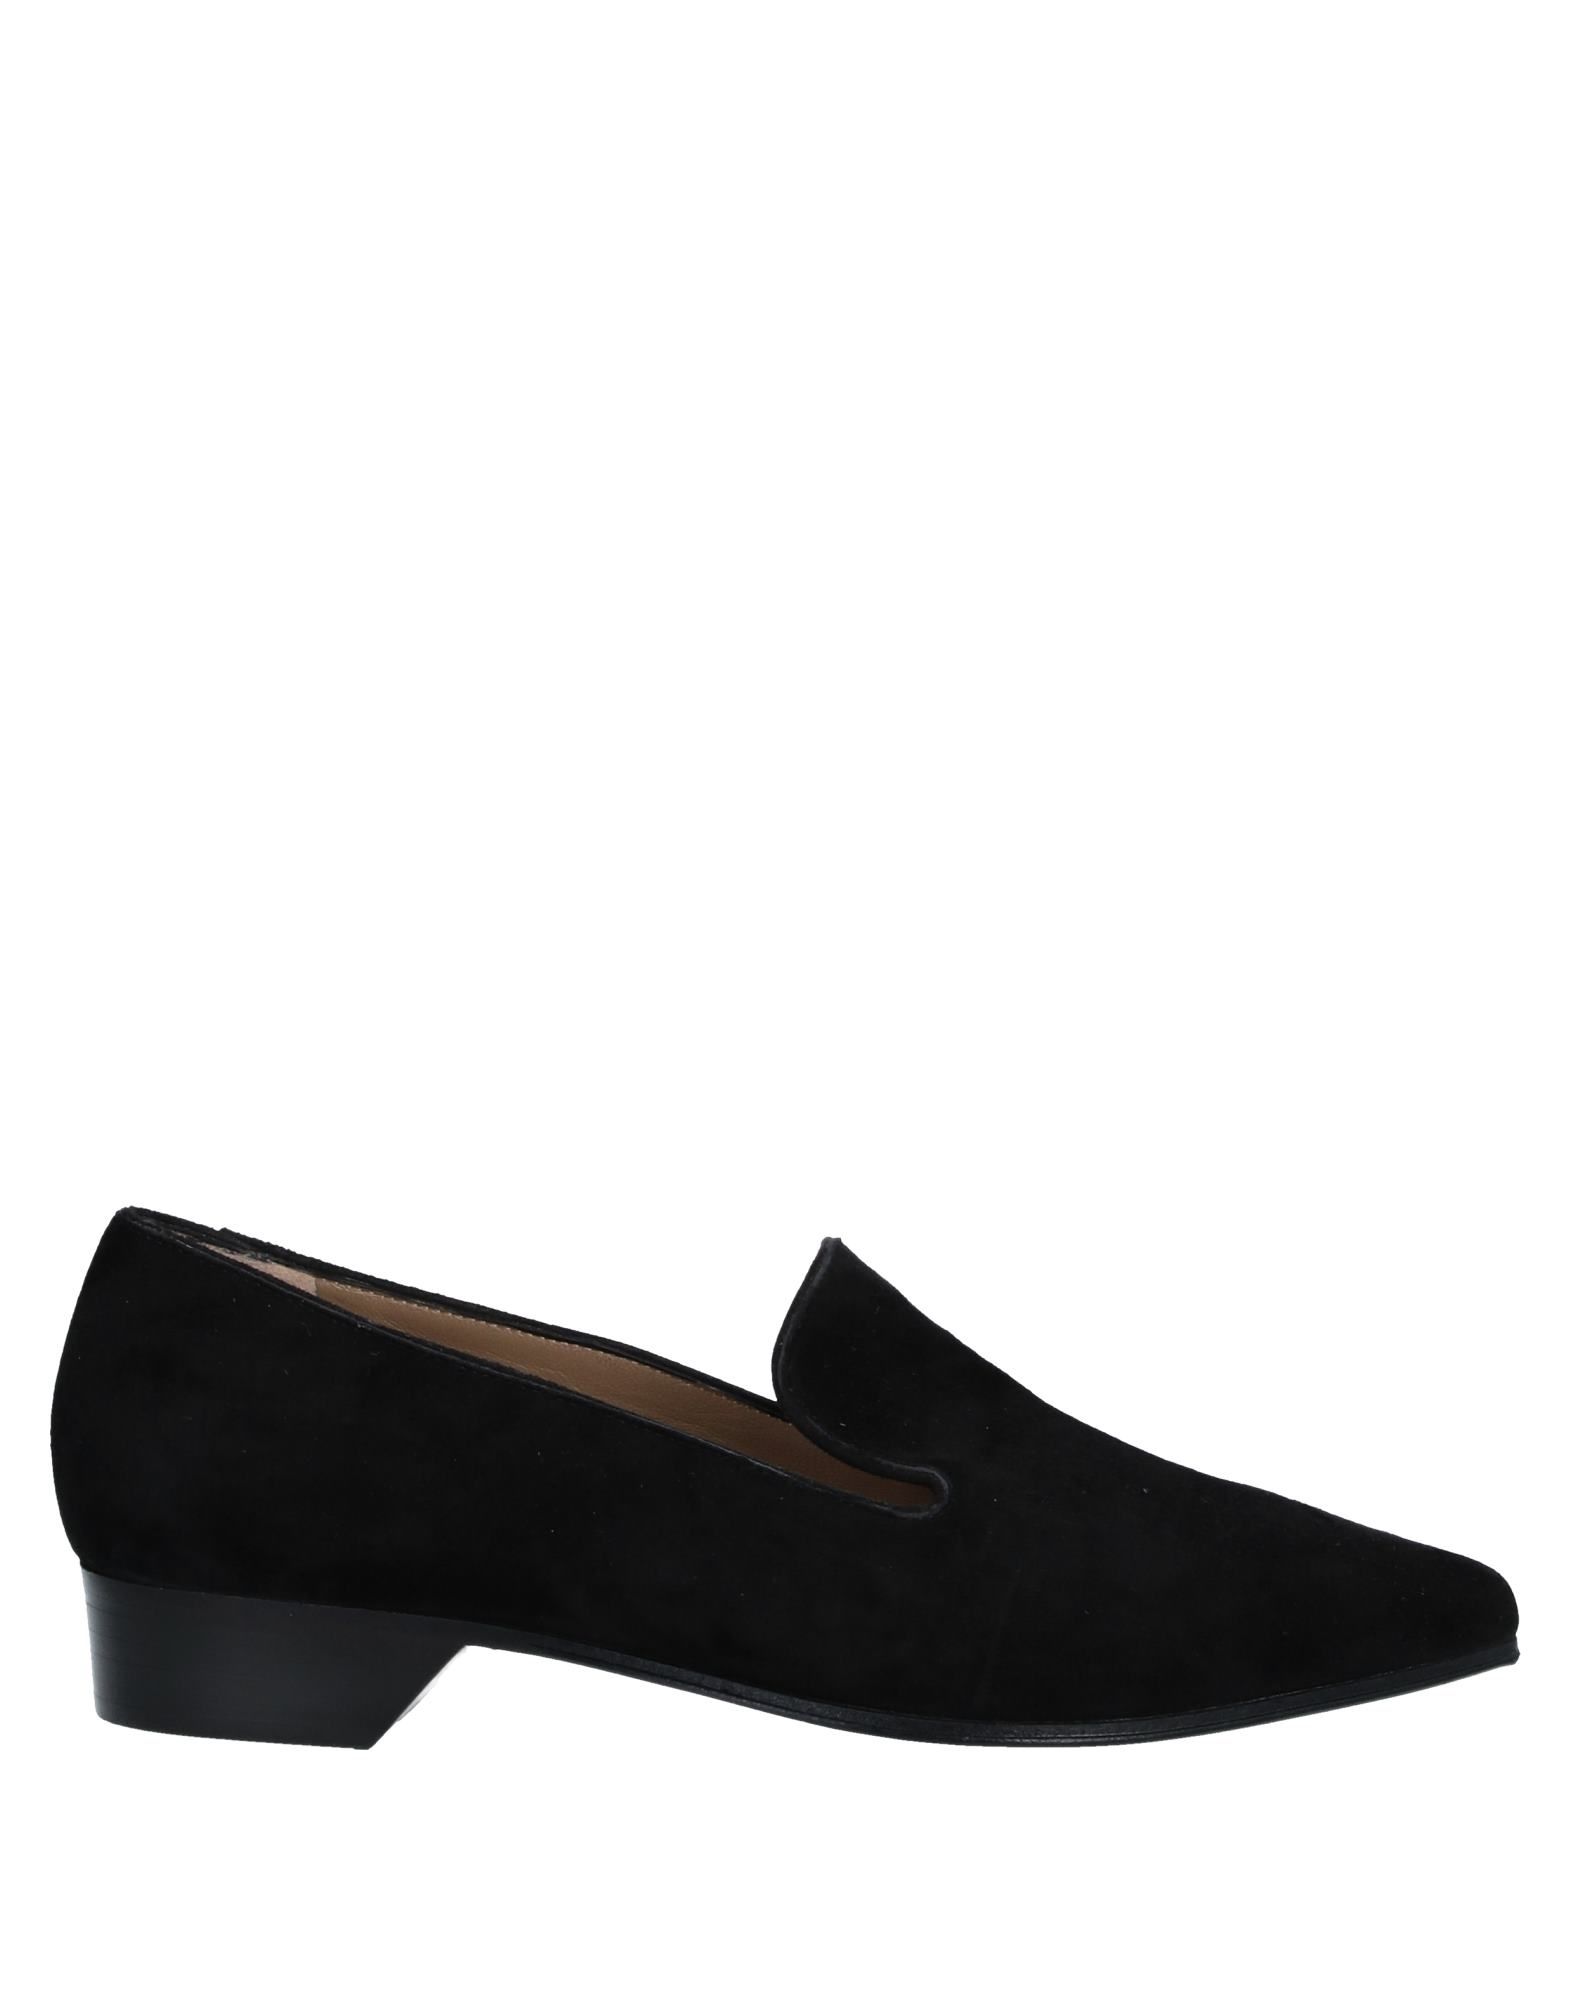 ALUMNAE Loafers,11481878WO 5